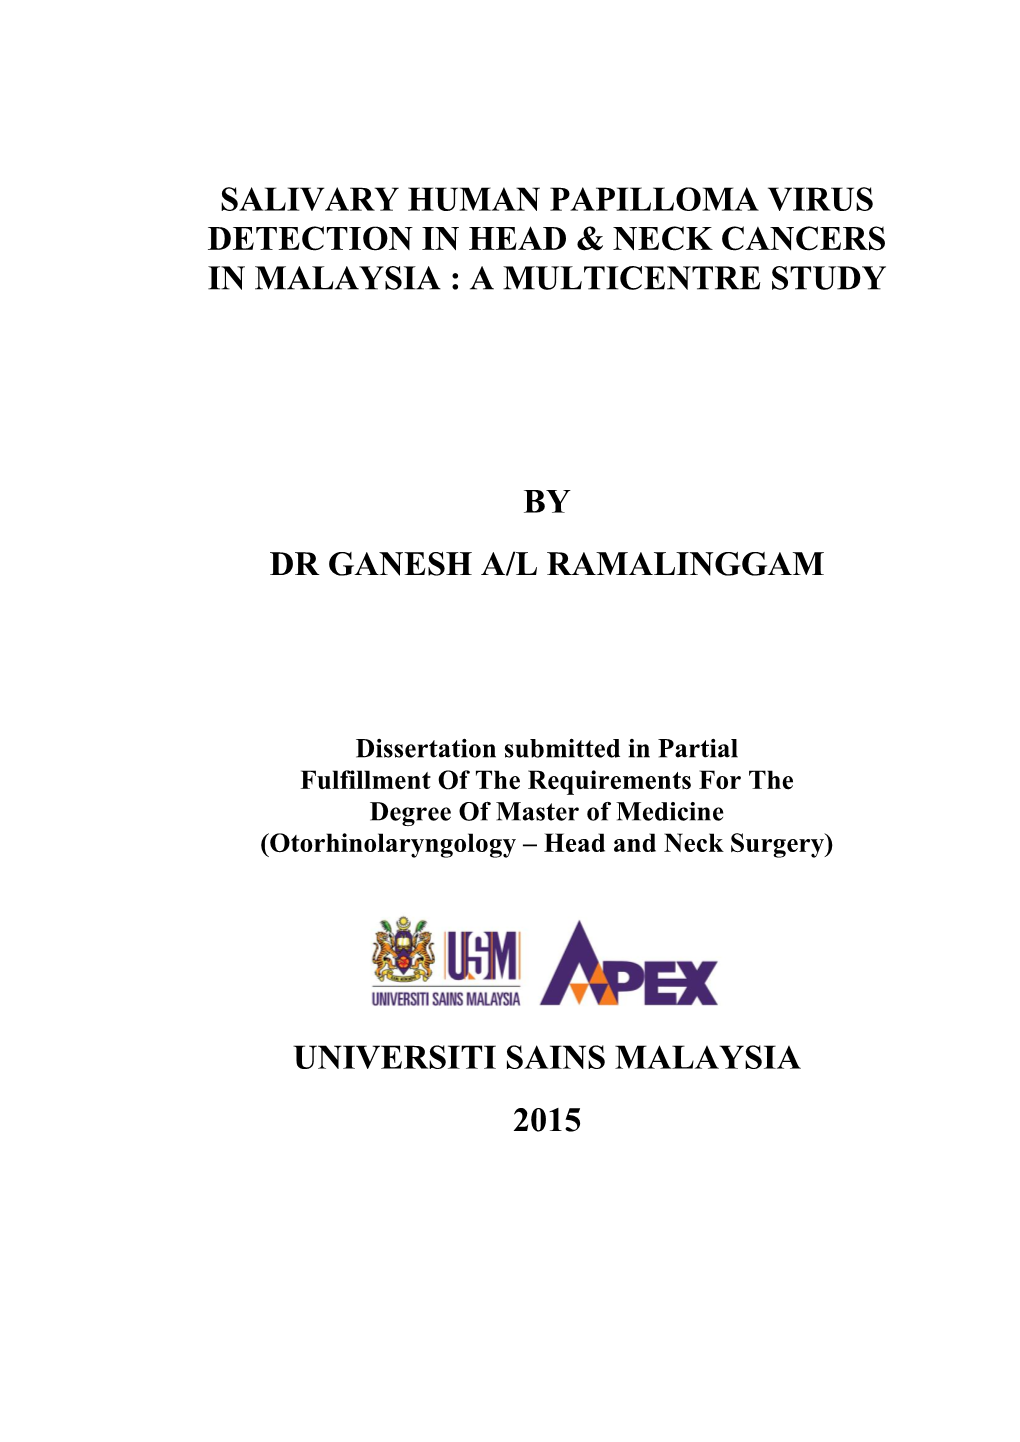 Salivary Human Papilloma Virus Detection in Head & Neck Cancers in Malaysia : a Multicentre Study